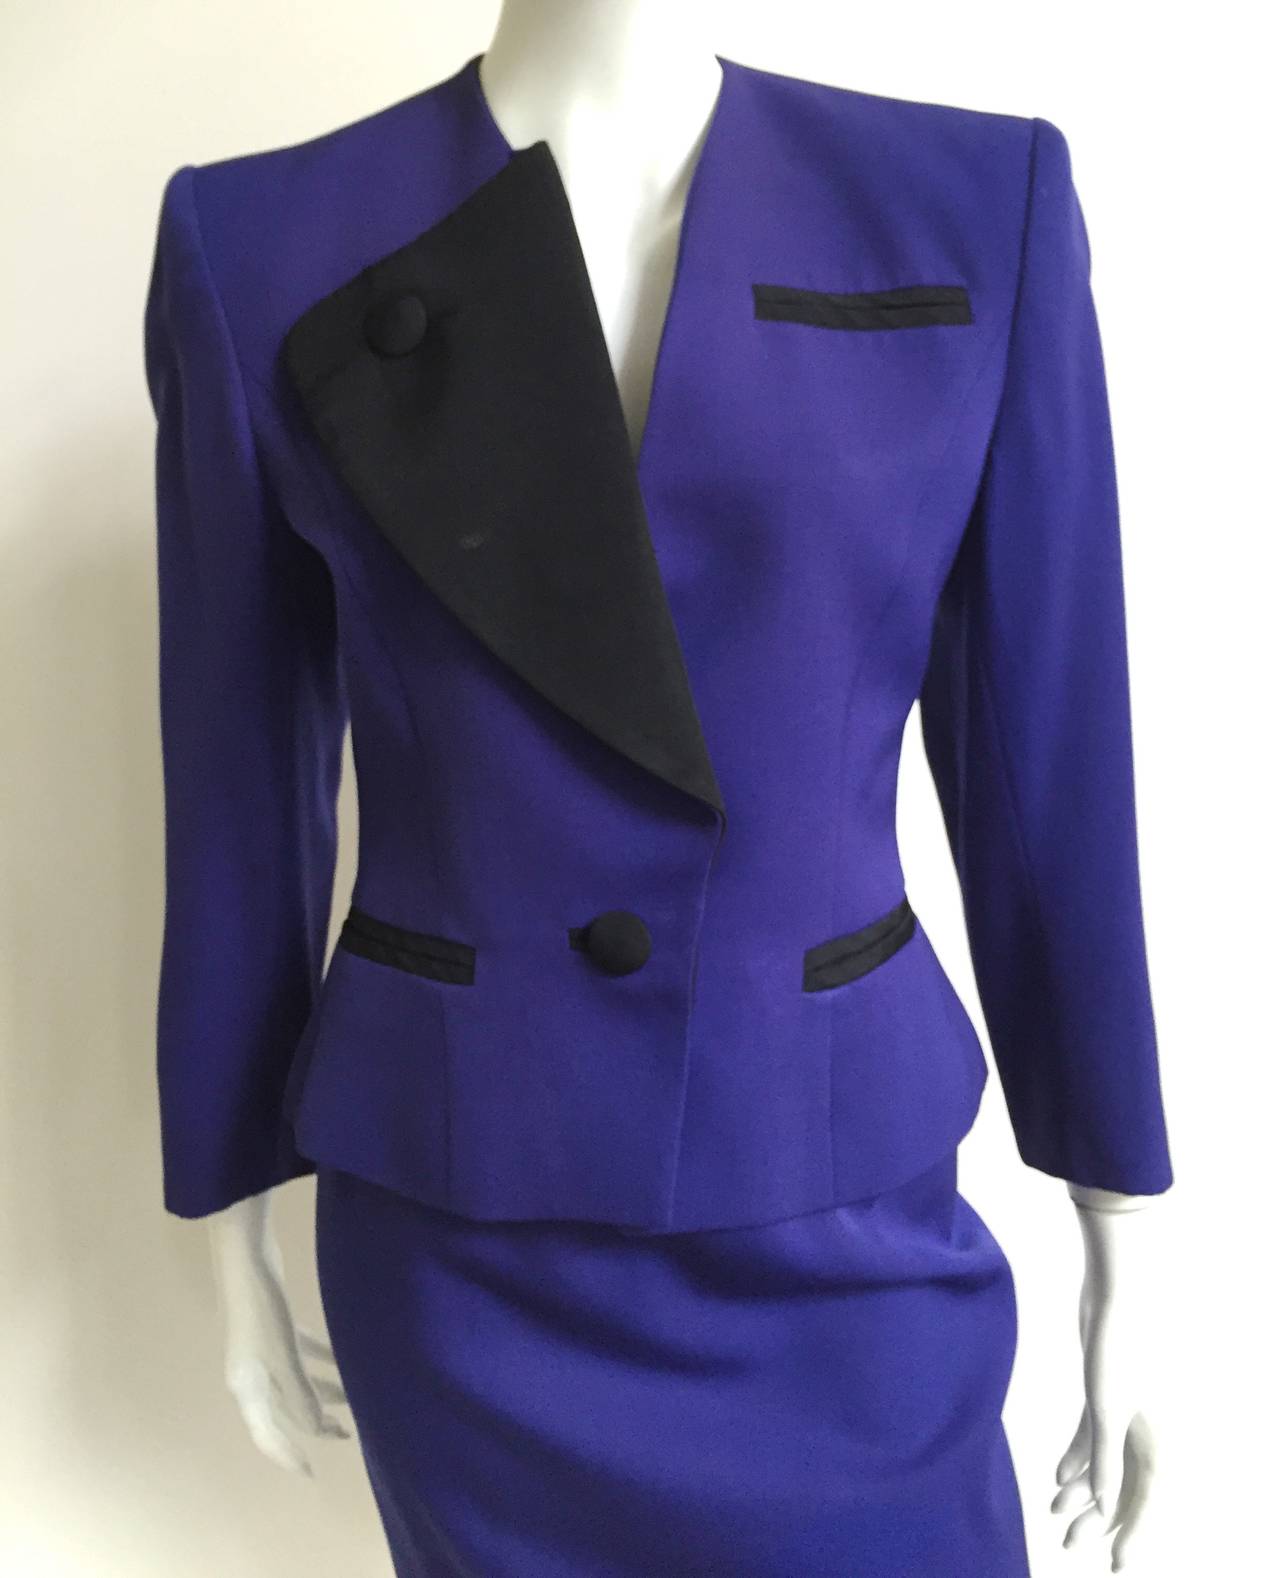 Guy Laroche 1980s ultra MOD wool skirt suit size 4 made in France.
Jacket measurements are:
36